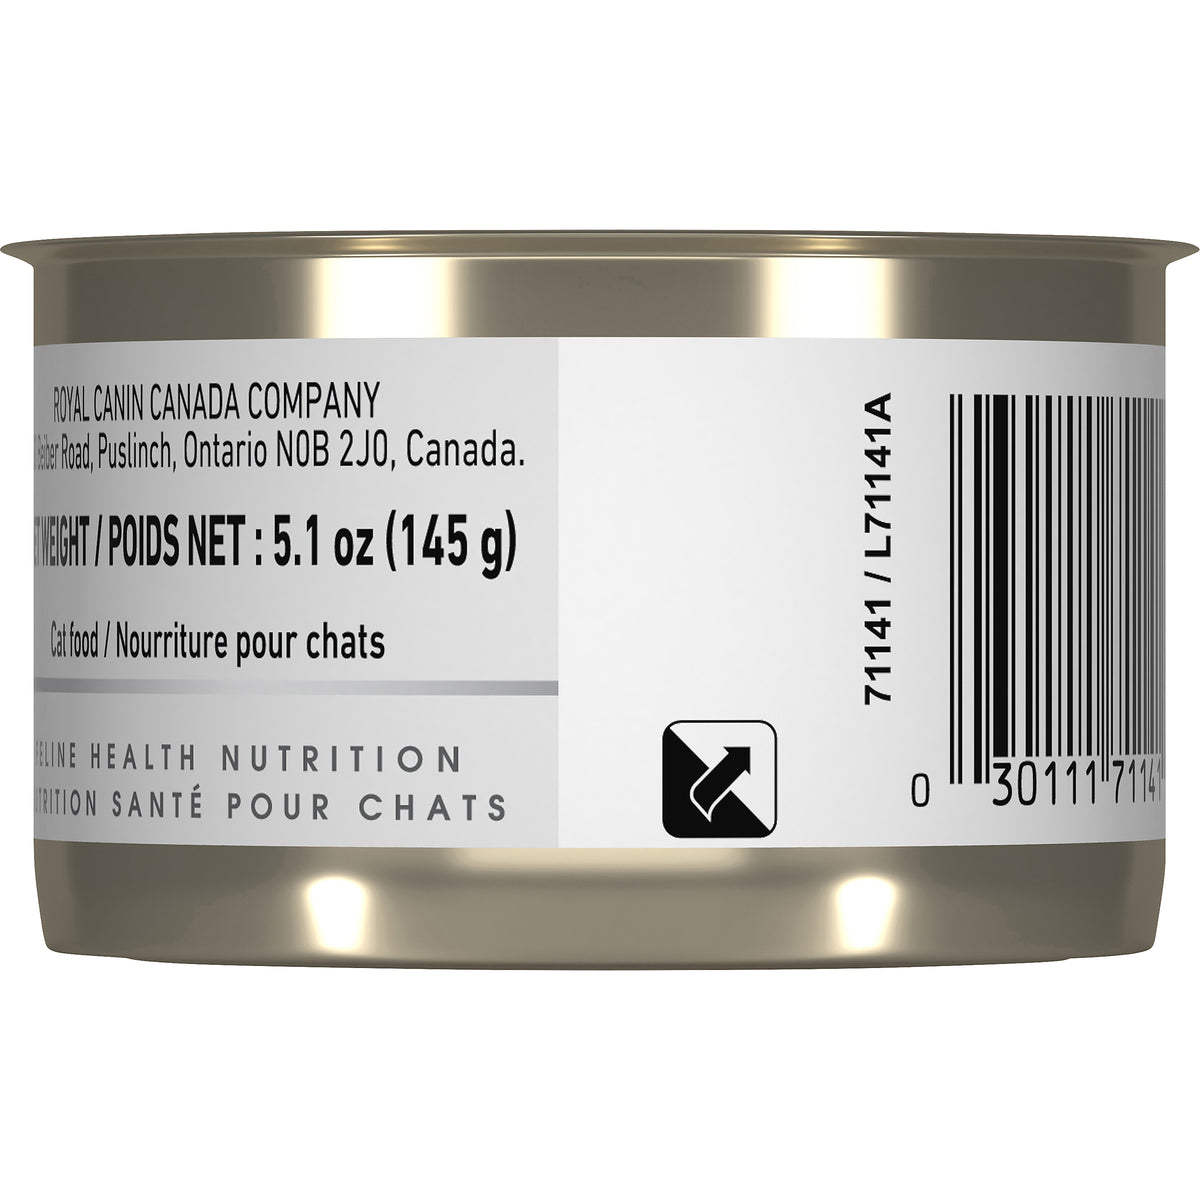 Royal Canin Aging 12+ (Loaf in Sauce / Pâté) - Canned Cat Food (145g)